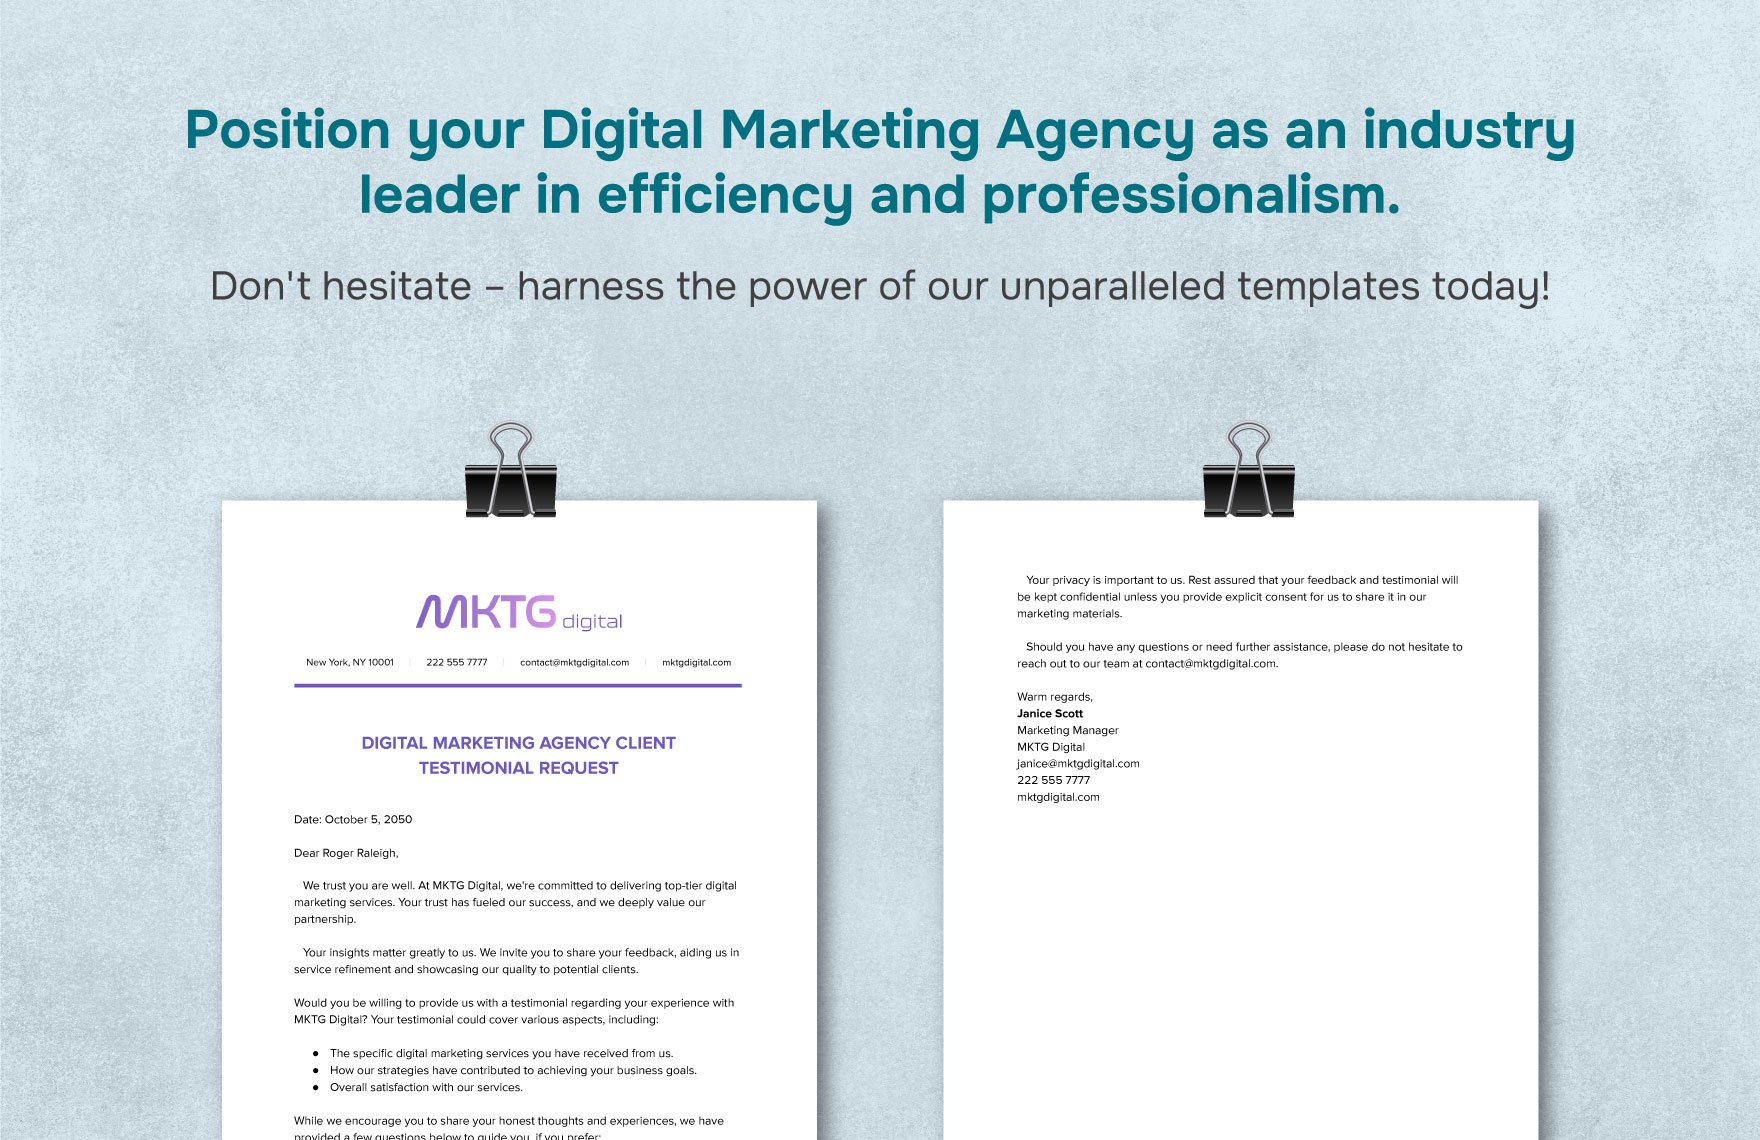 Digital Marketing Agency Client Testimonial Request Template